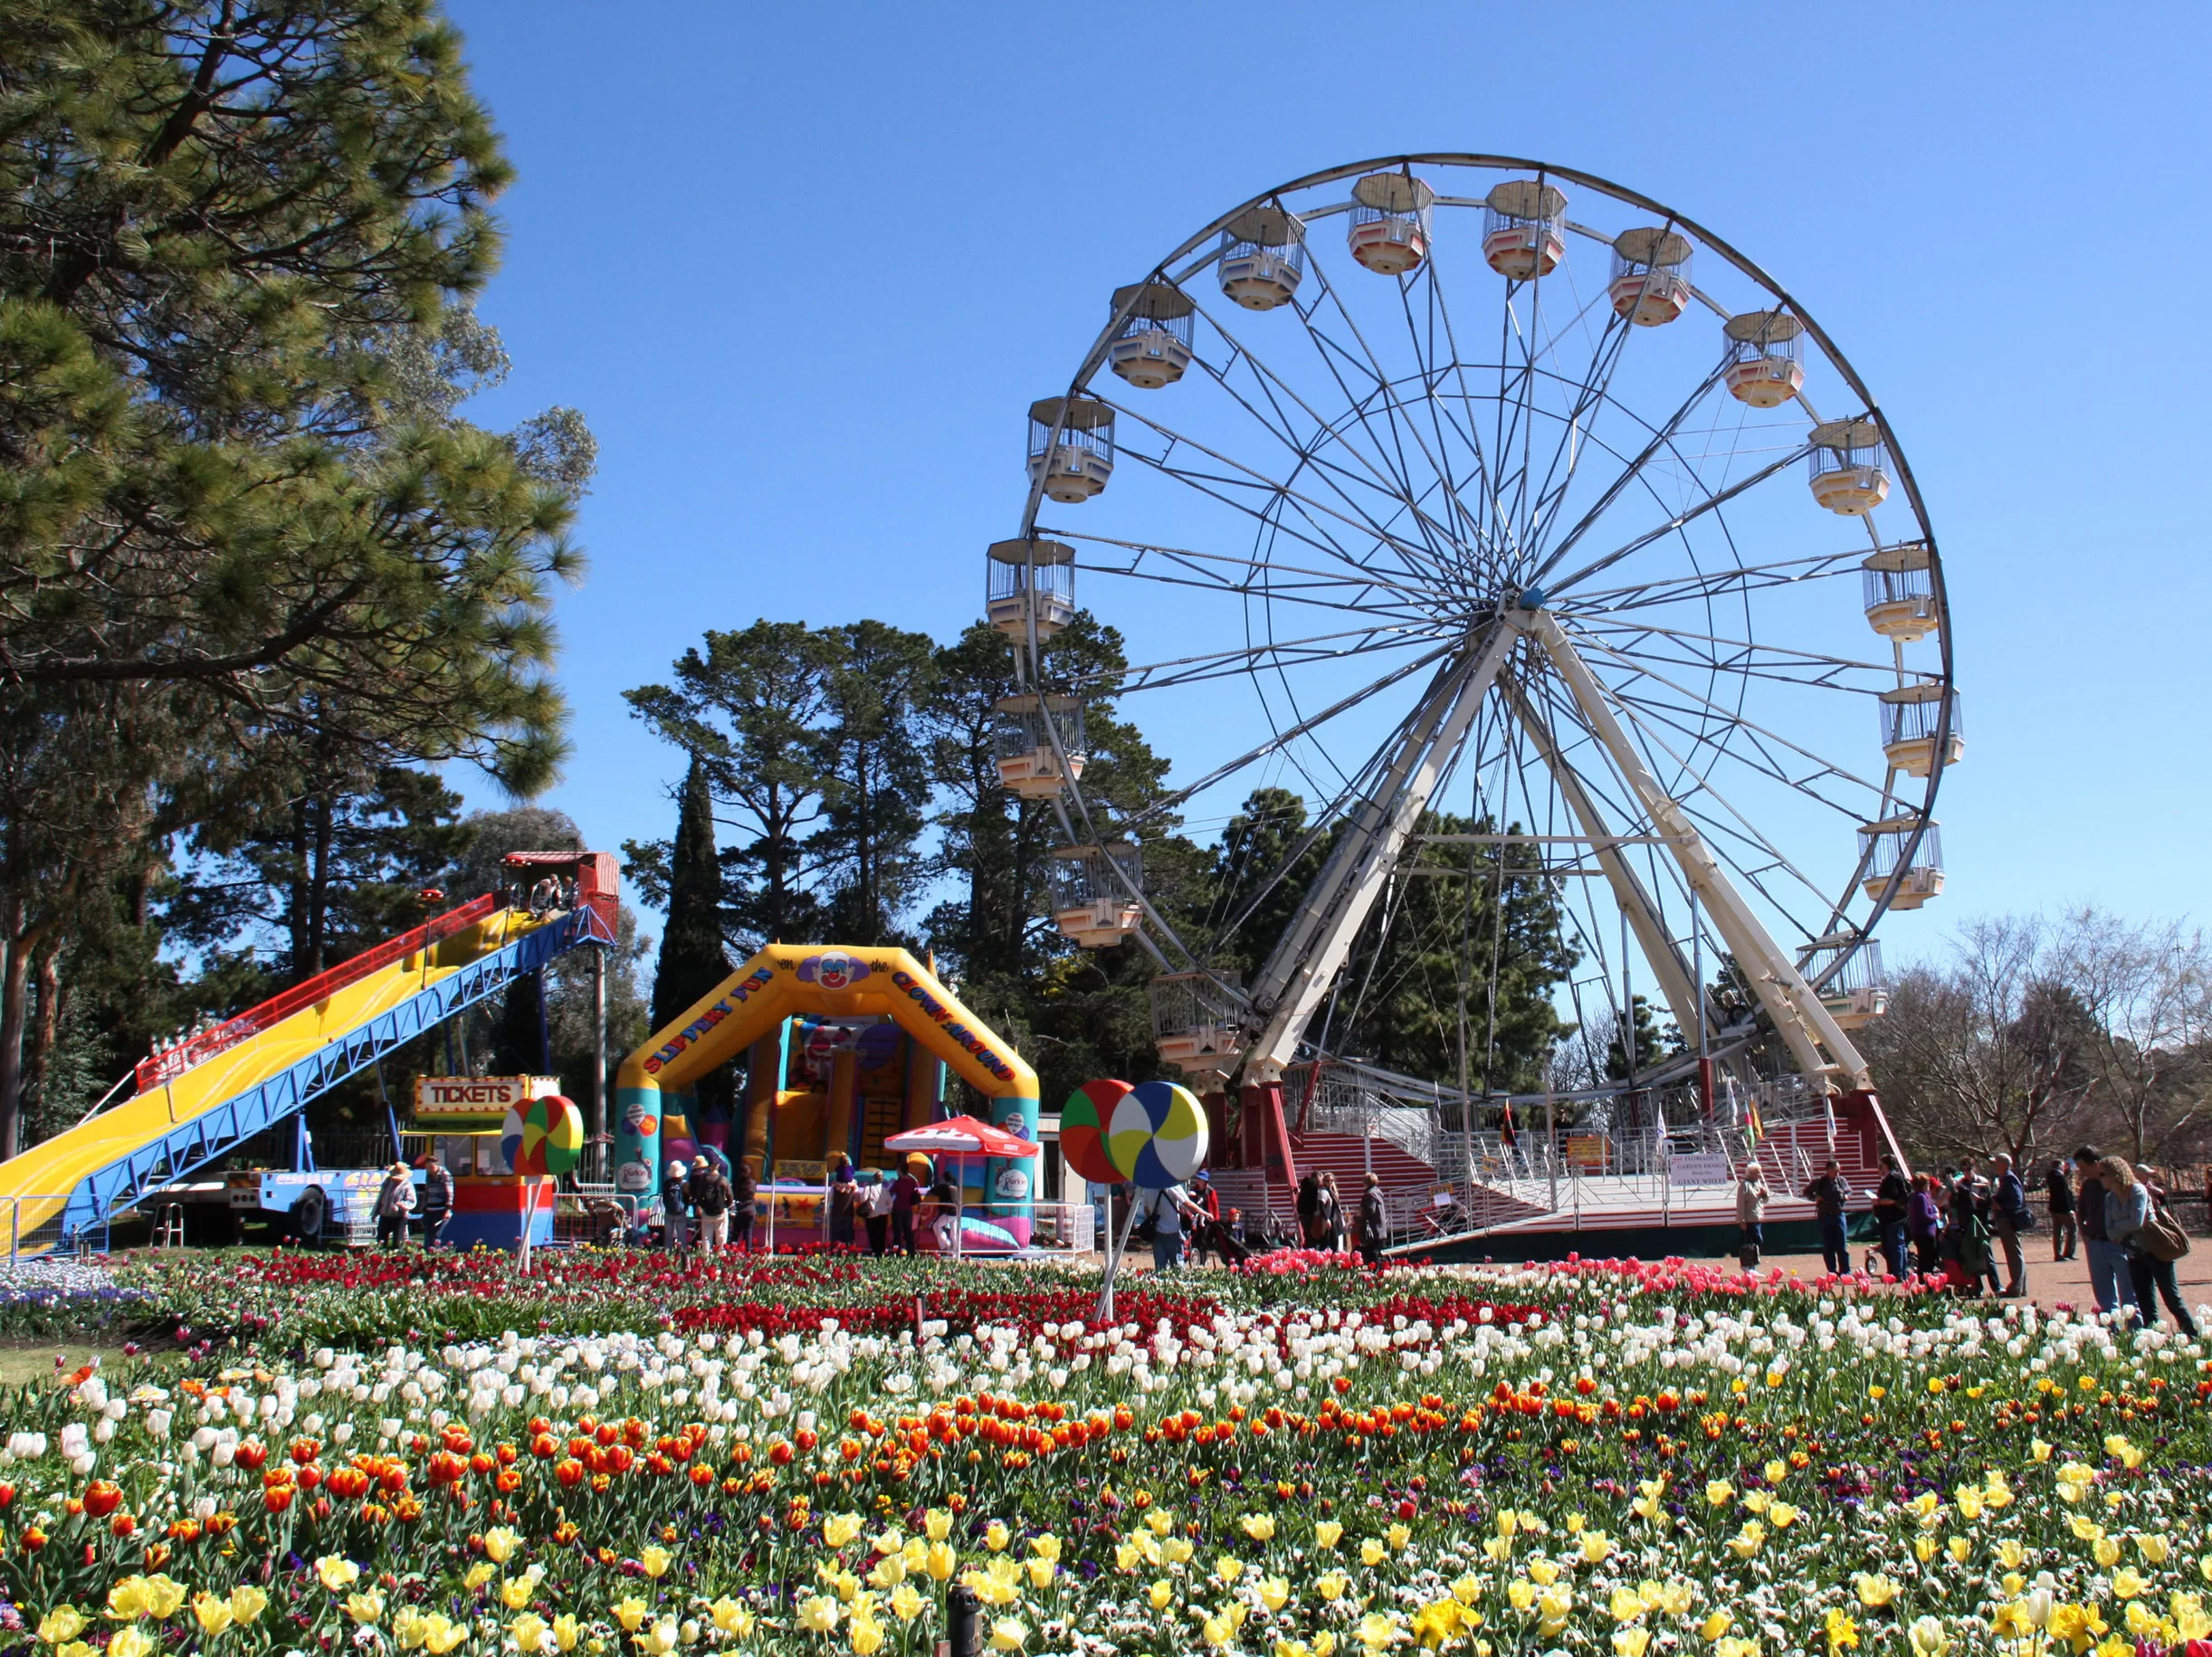 More than one million bulbs and annuals form Floriade